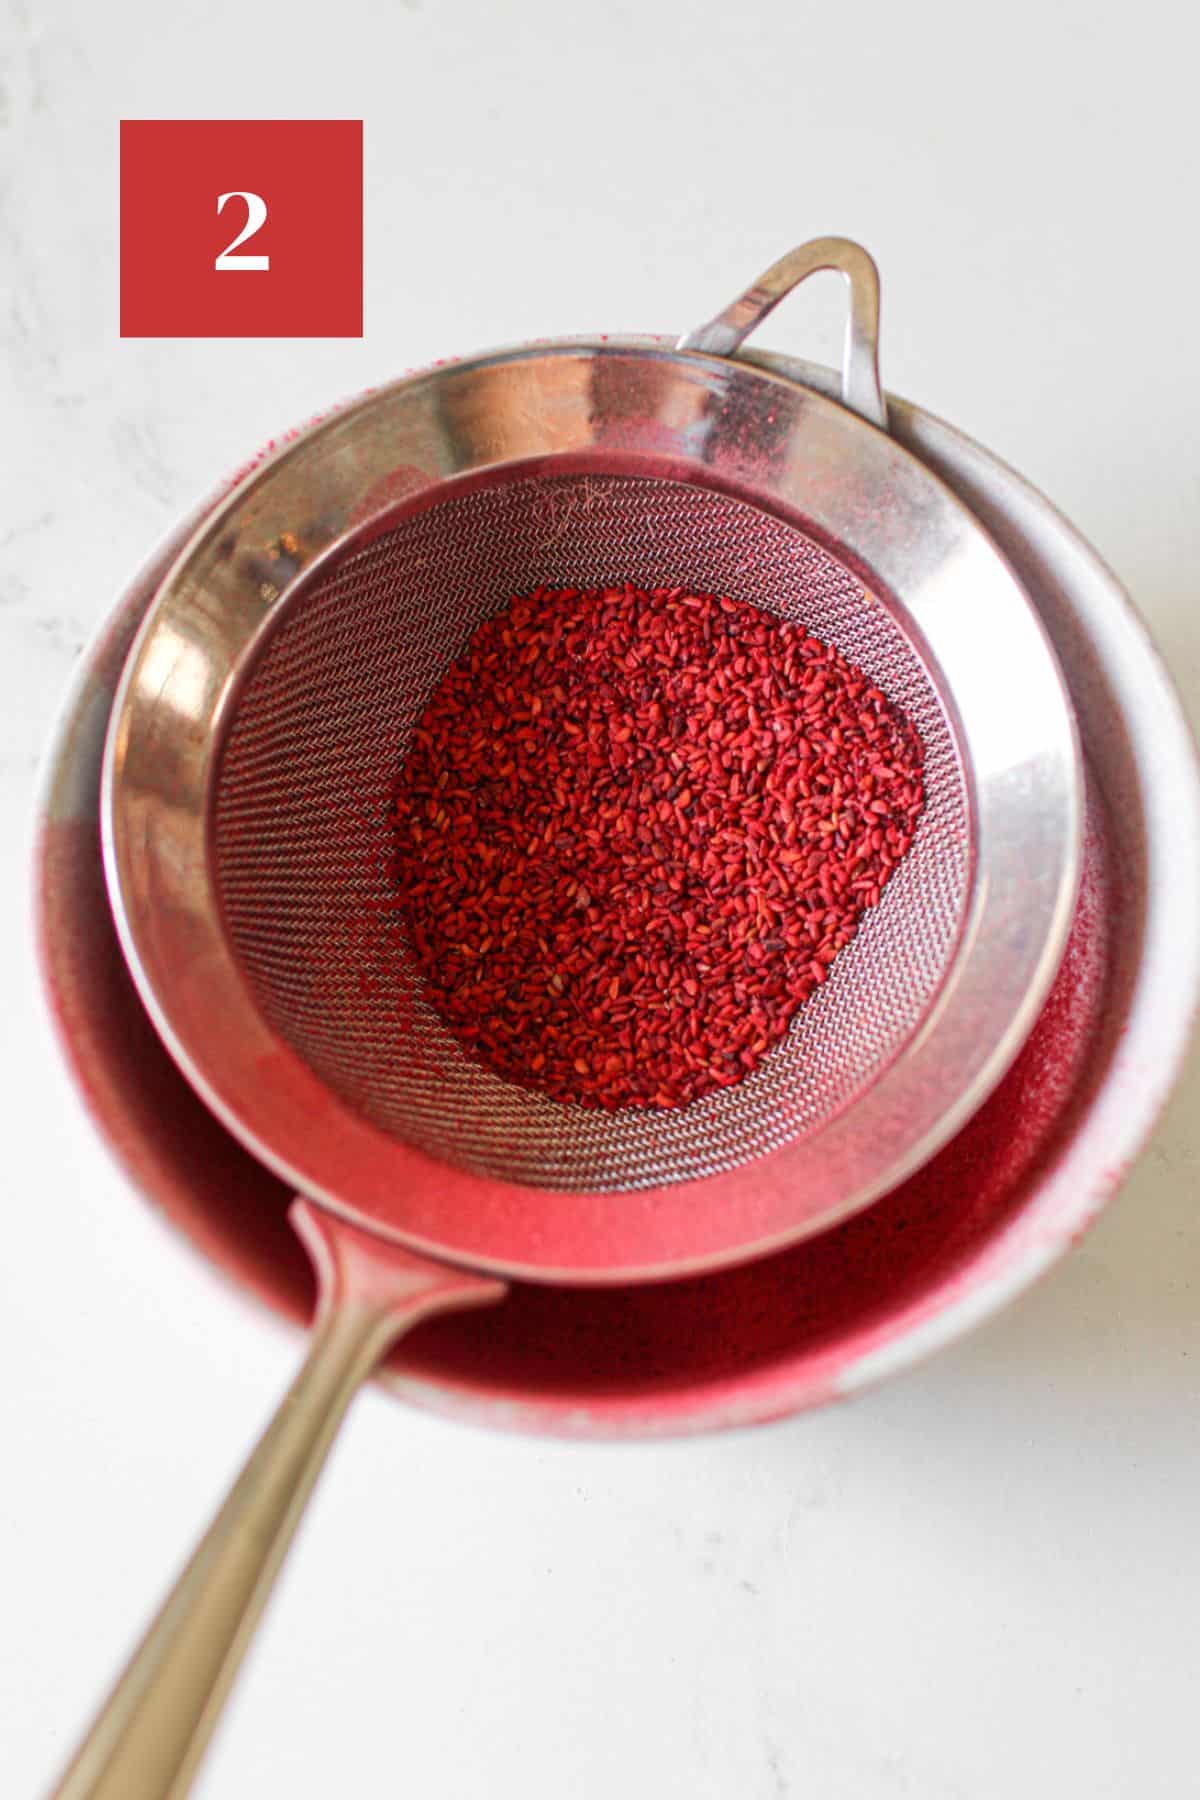  Raspberry freeze dried powder in a small fine mesh strainer with seeds in the strainer in a white bowl on a white table. In the upper left corner is a dark red square with a white '1' in the center.